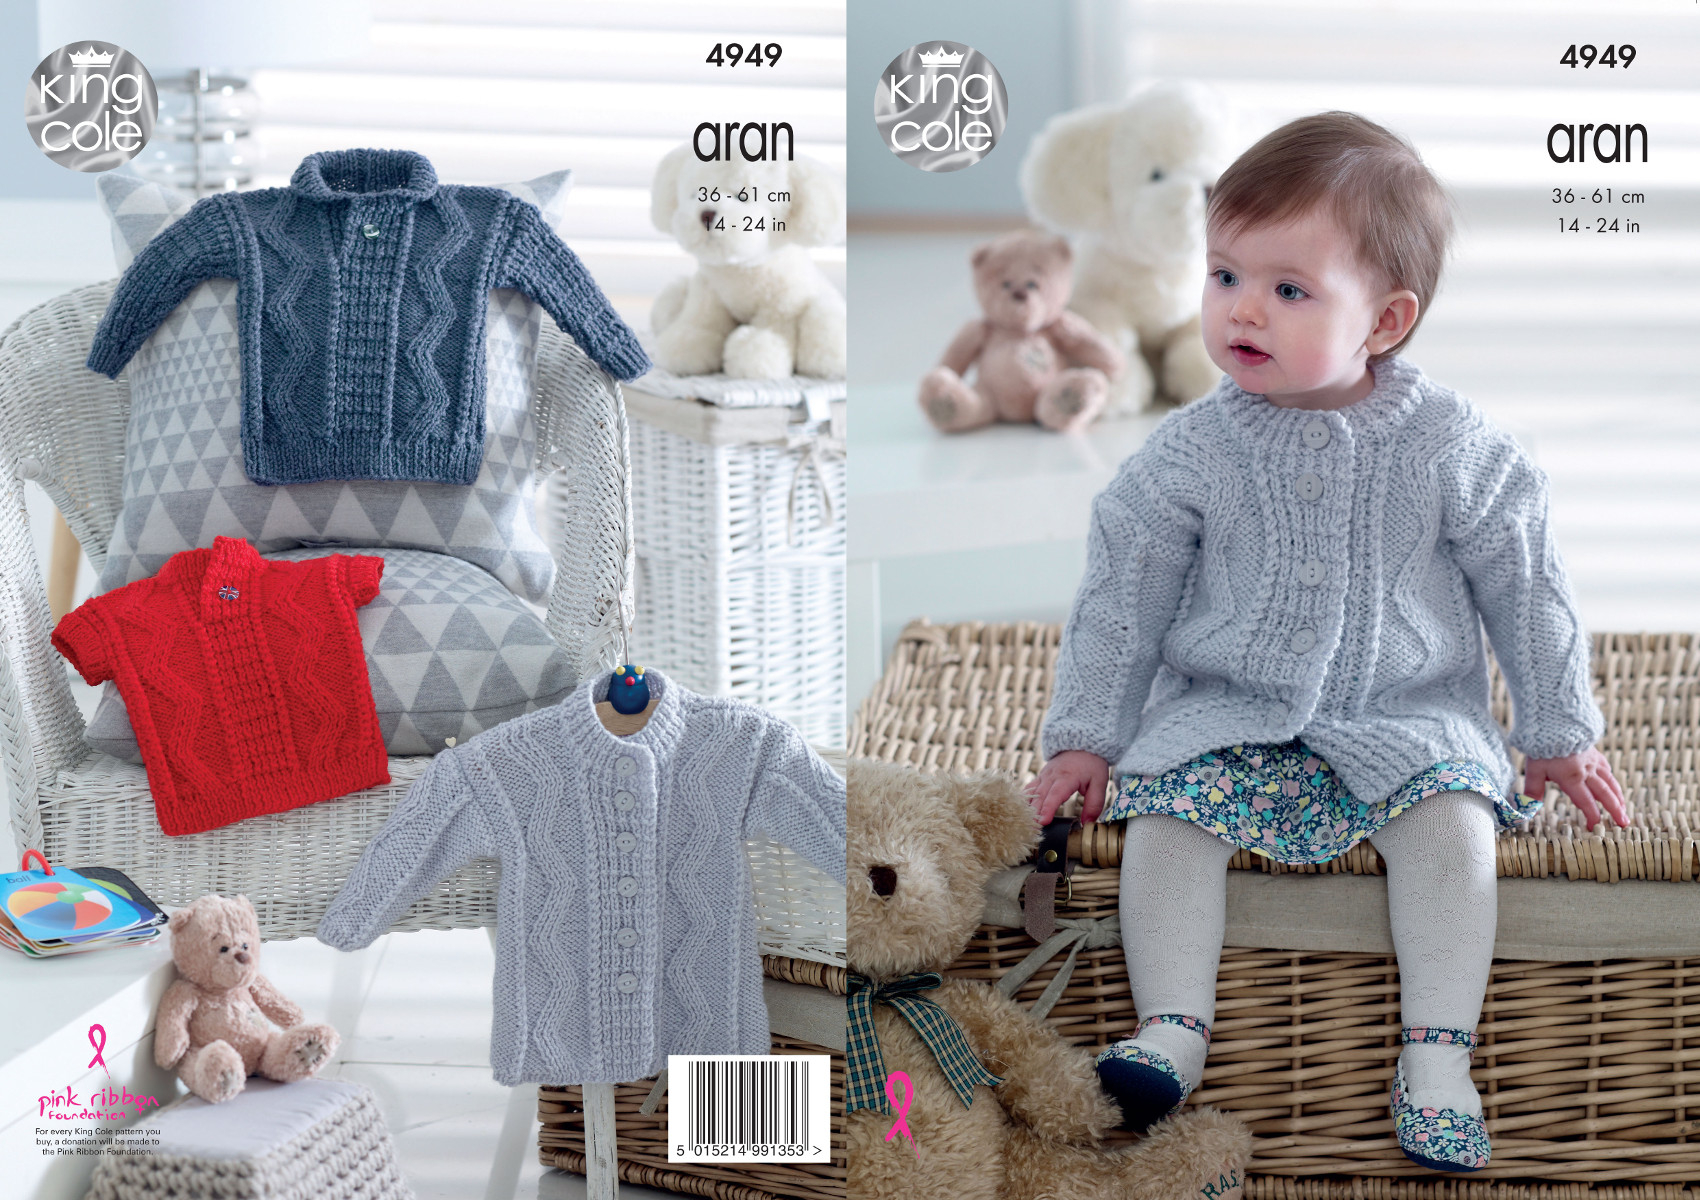 Childrens Aran Knitting Patterns Details About King Cole Ba Aran Knitting Pattern Cabled Coat Jumper Sleeveless Pullover 4949